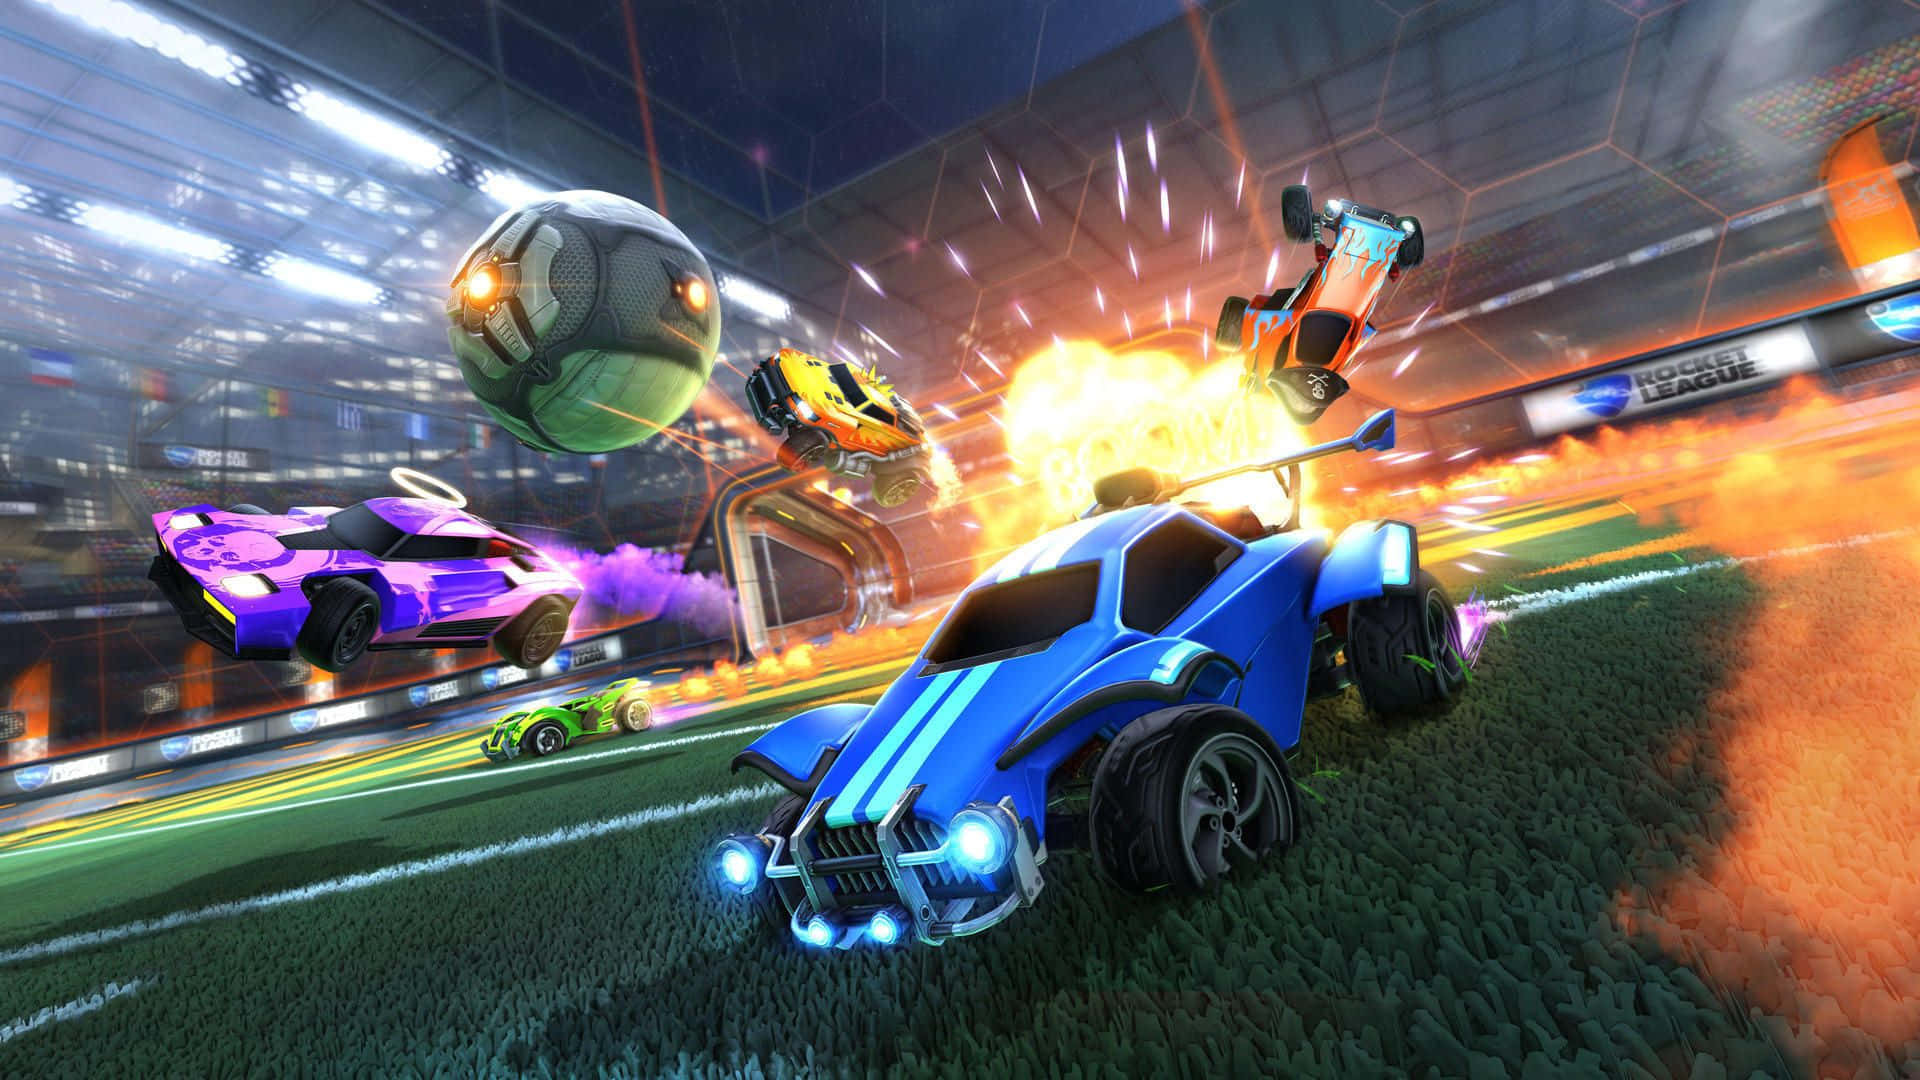 Enjoy the Fast-Paced Action of Rocket League in HD